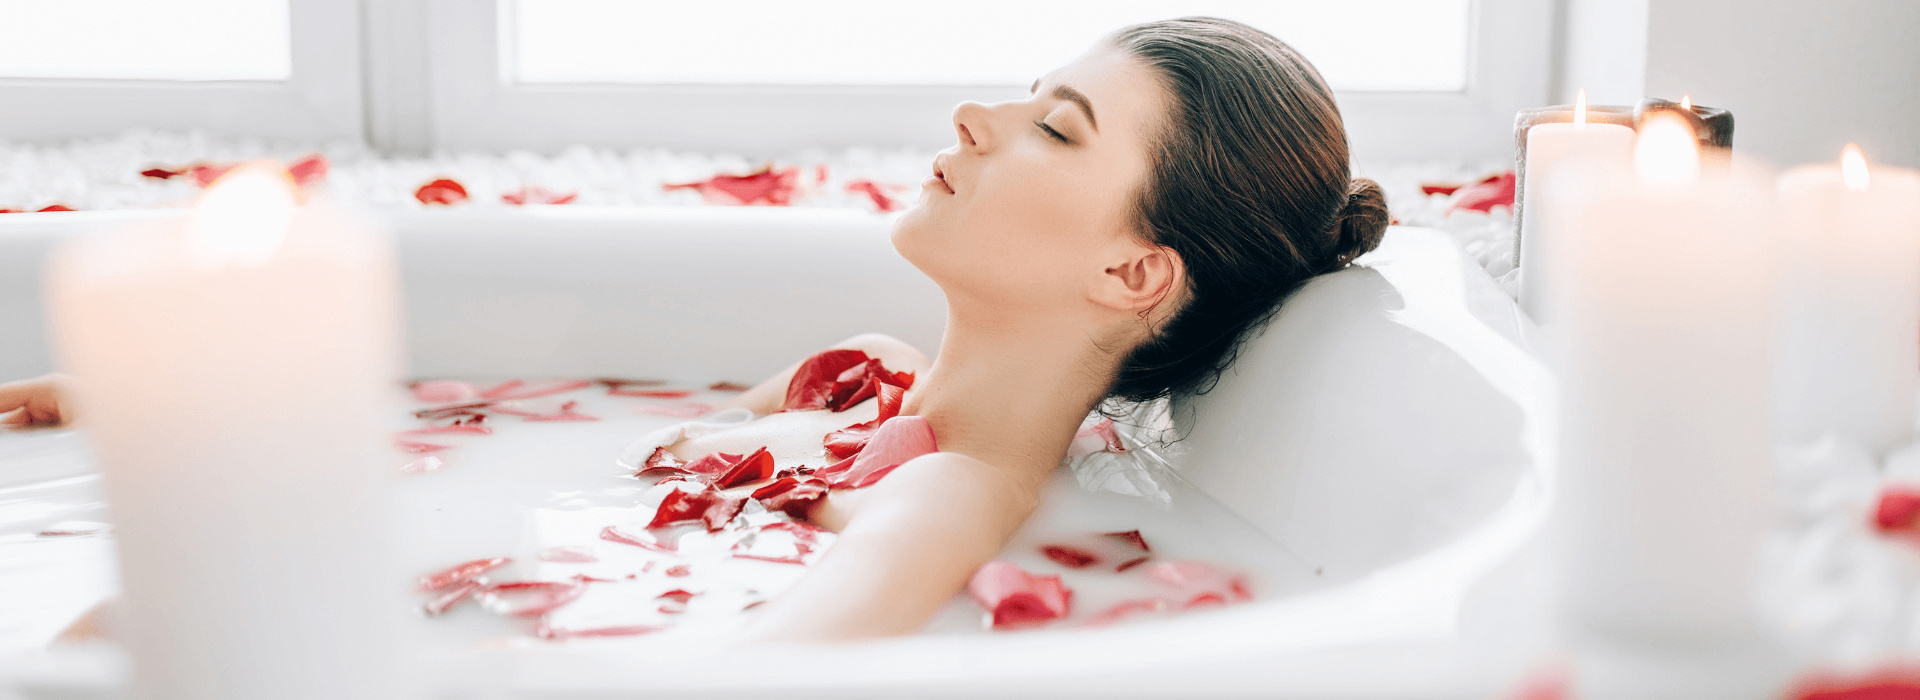 How to use your Chakra Soap | Woman relaxing bath surrounded by candles and petals | Shine Body & Bath Chakra Soap | Blog